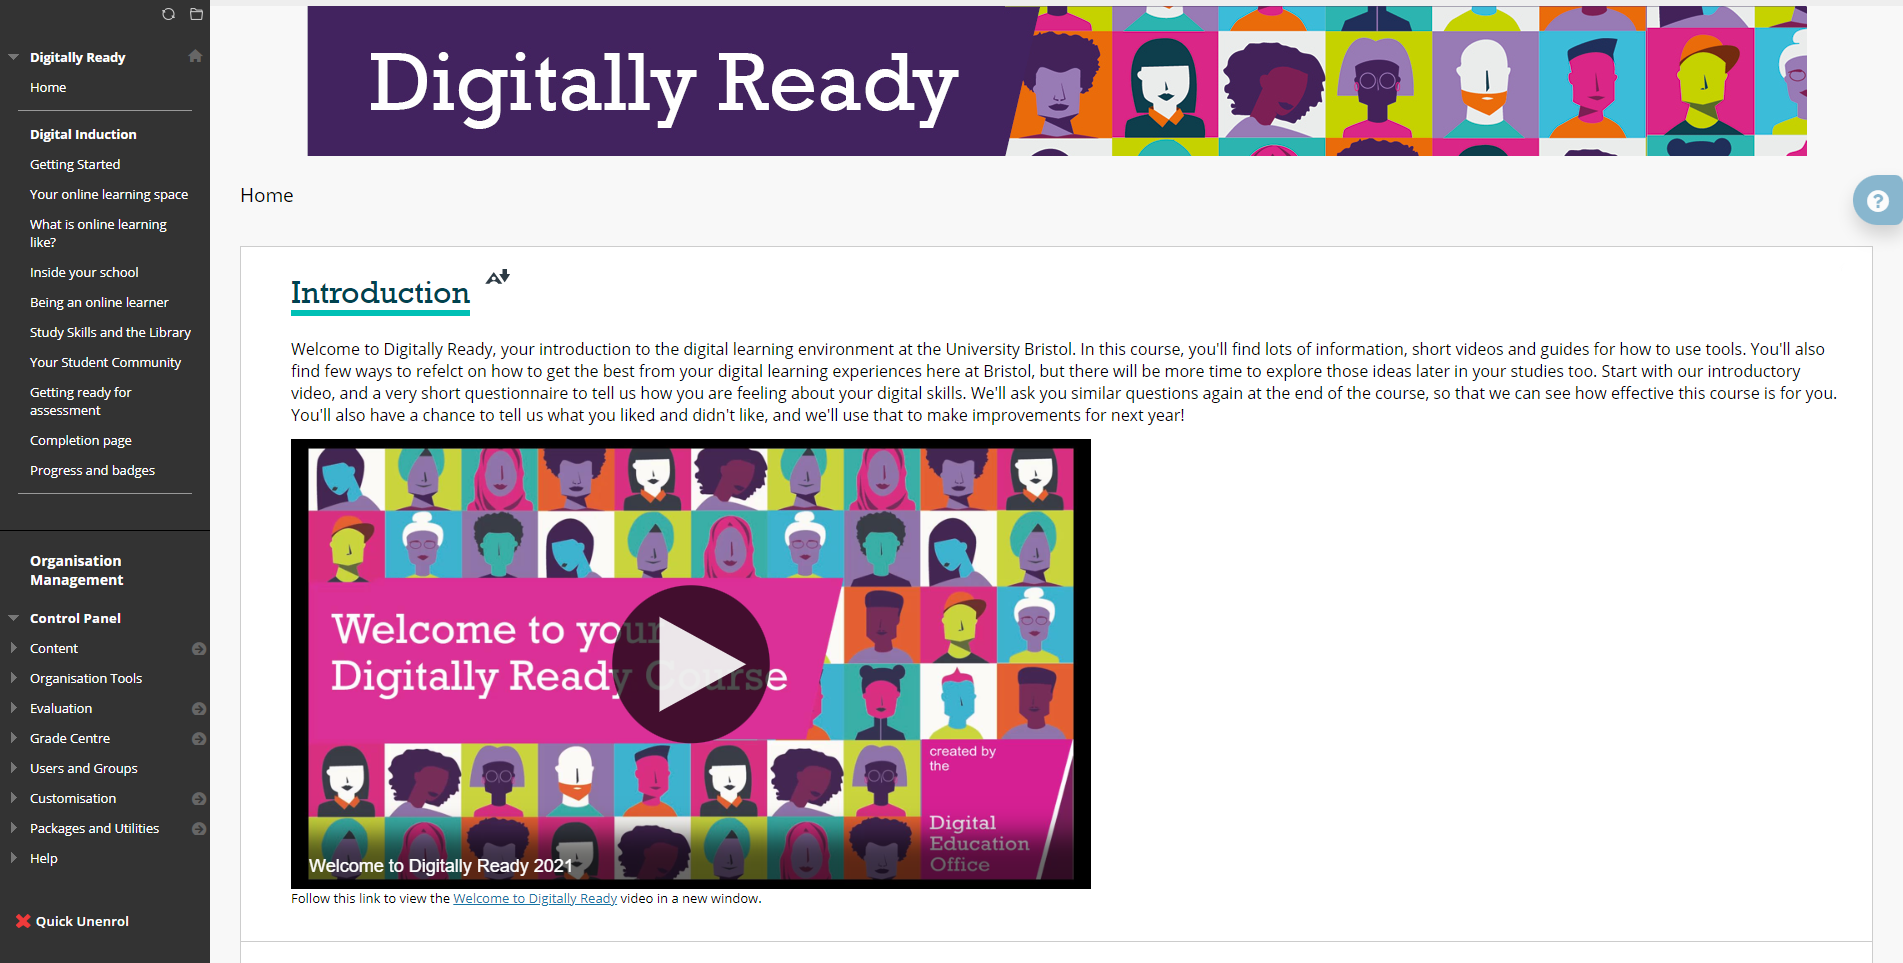 Digitally Ready course for first year students 2021 Screenshot